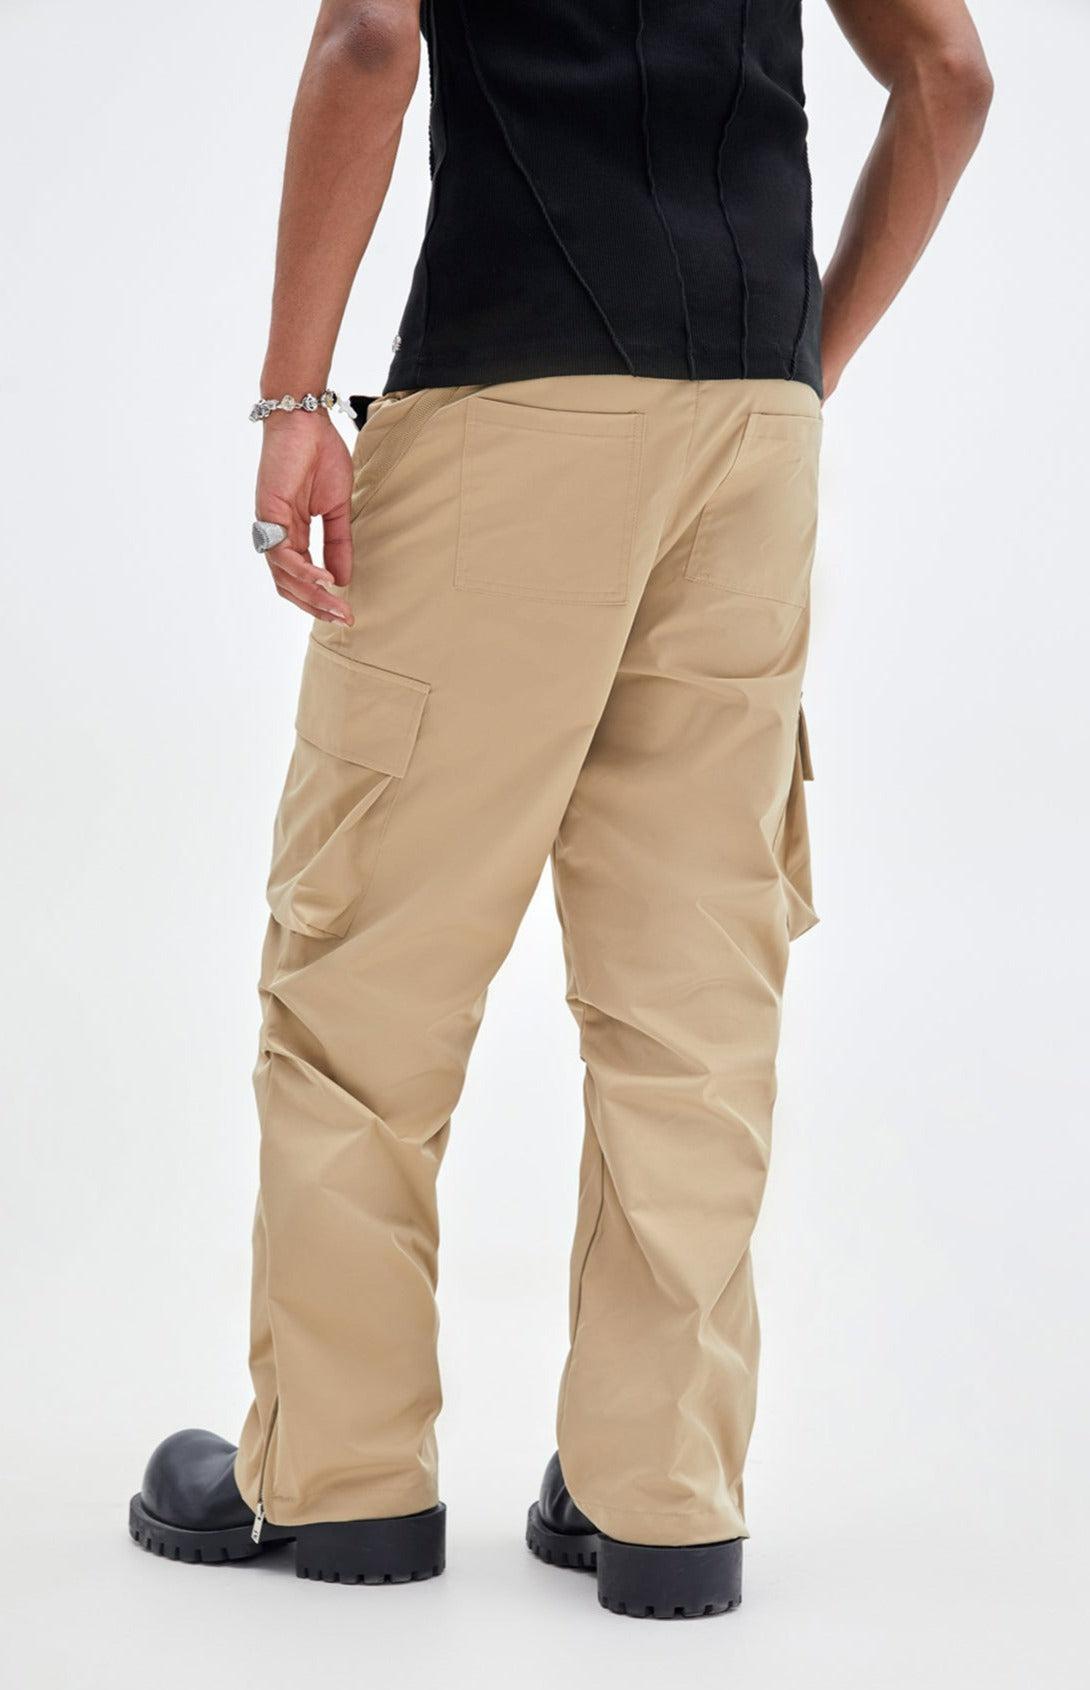 Made Extreme Drawstring Pleats Cargo Style Pants Korean Street Fashion Pants By Made Extreme Shop Online at OH Vault